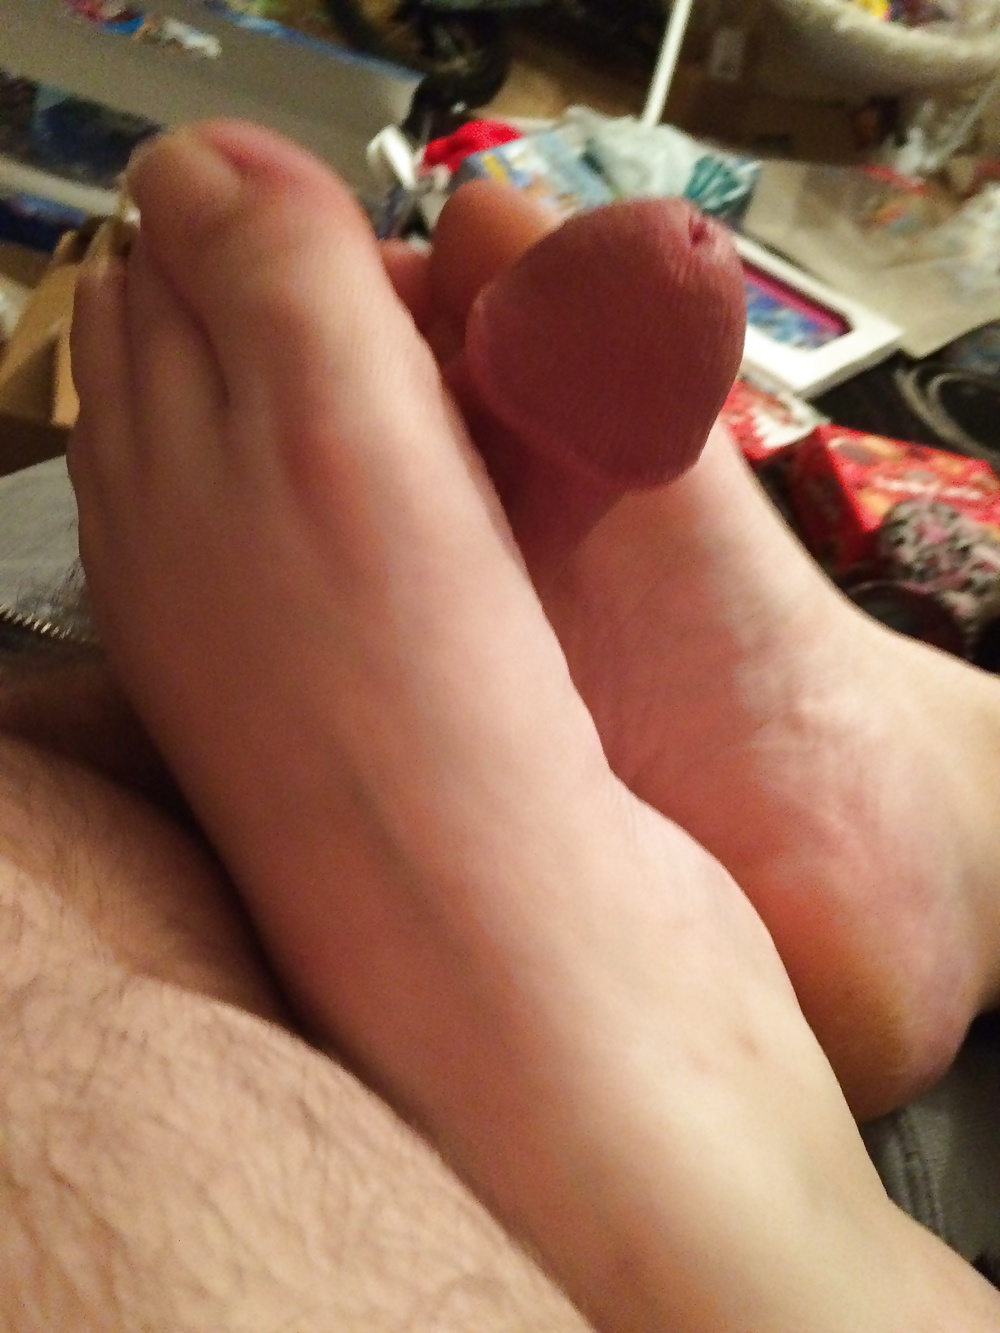 Getting A Footjob From My GF #40802051